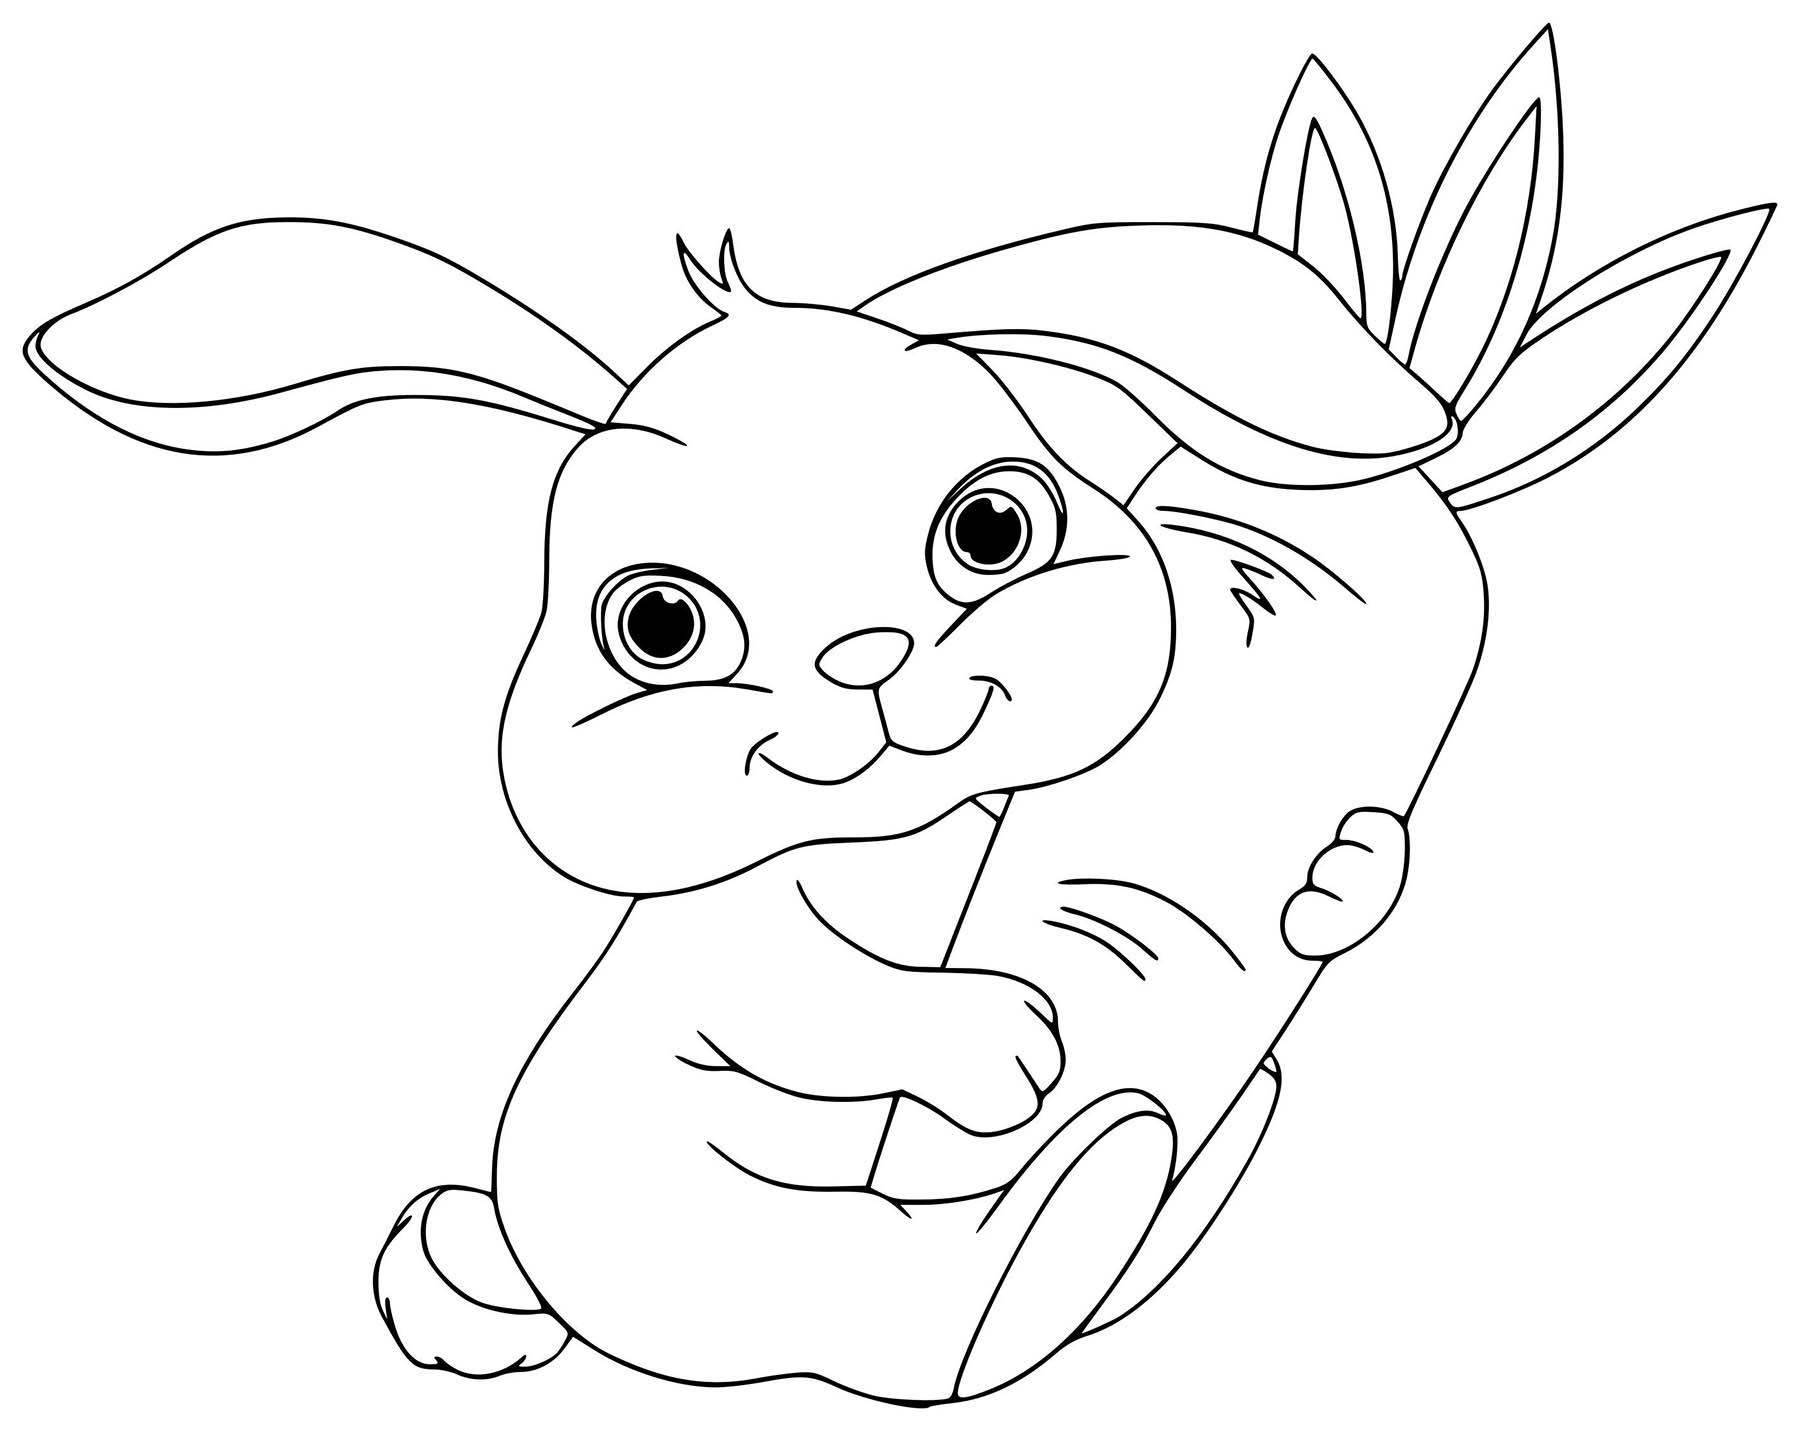 Coloriage Lapin 12 Coloriage Lapins Coloriages Animaux | Images and ...